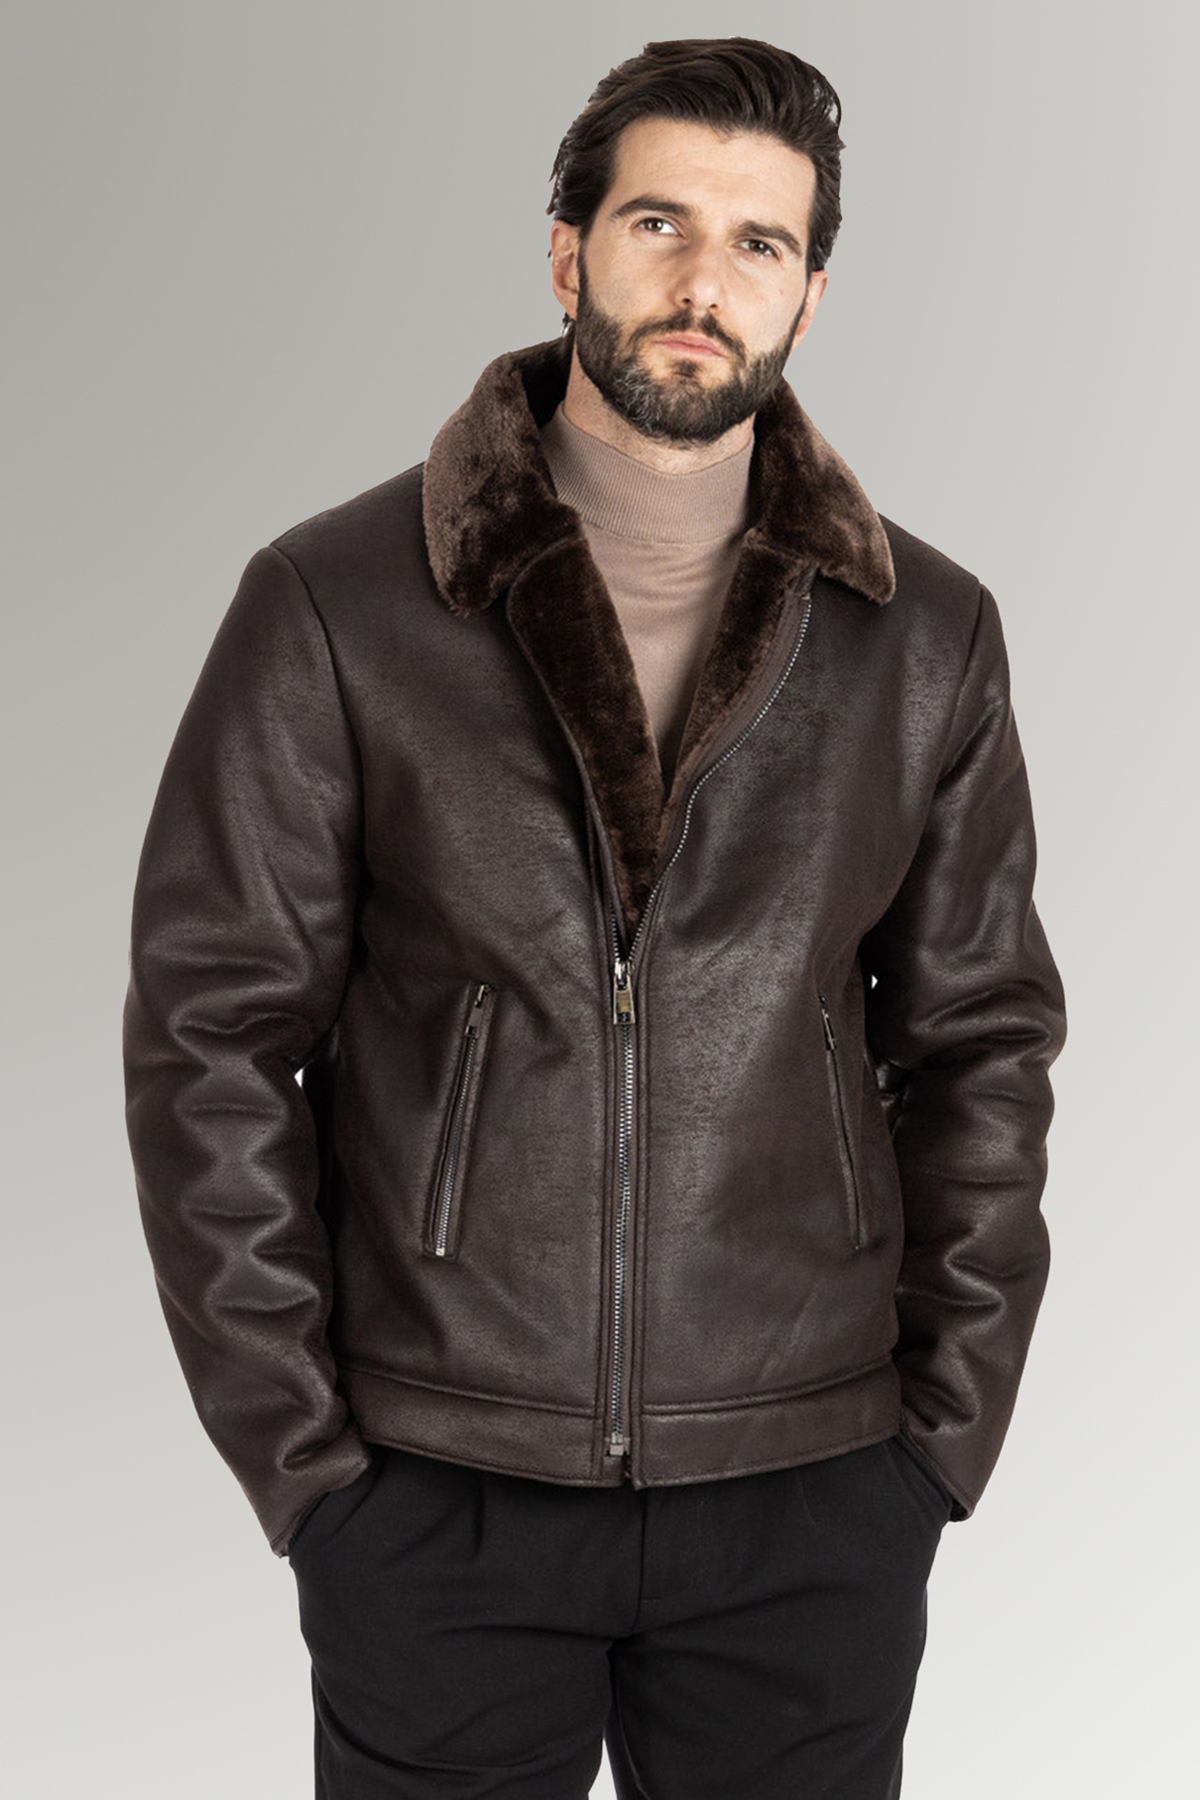 B3 Bomber Military Shearling Classic Leather Jacket